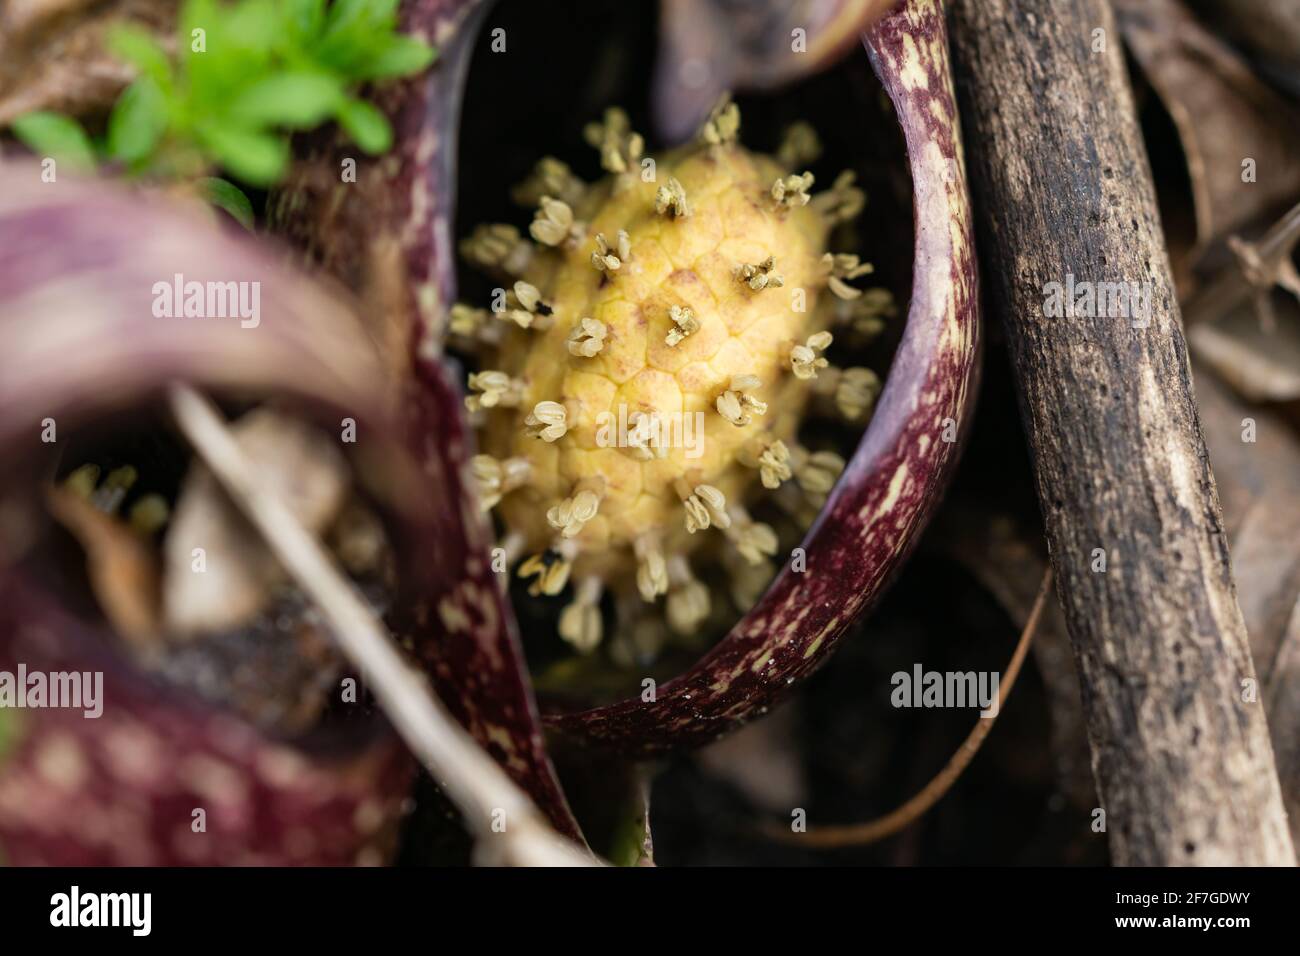 Eastern Skunk Cabbage Inflorescence in Springtime Stock Photo